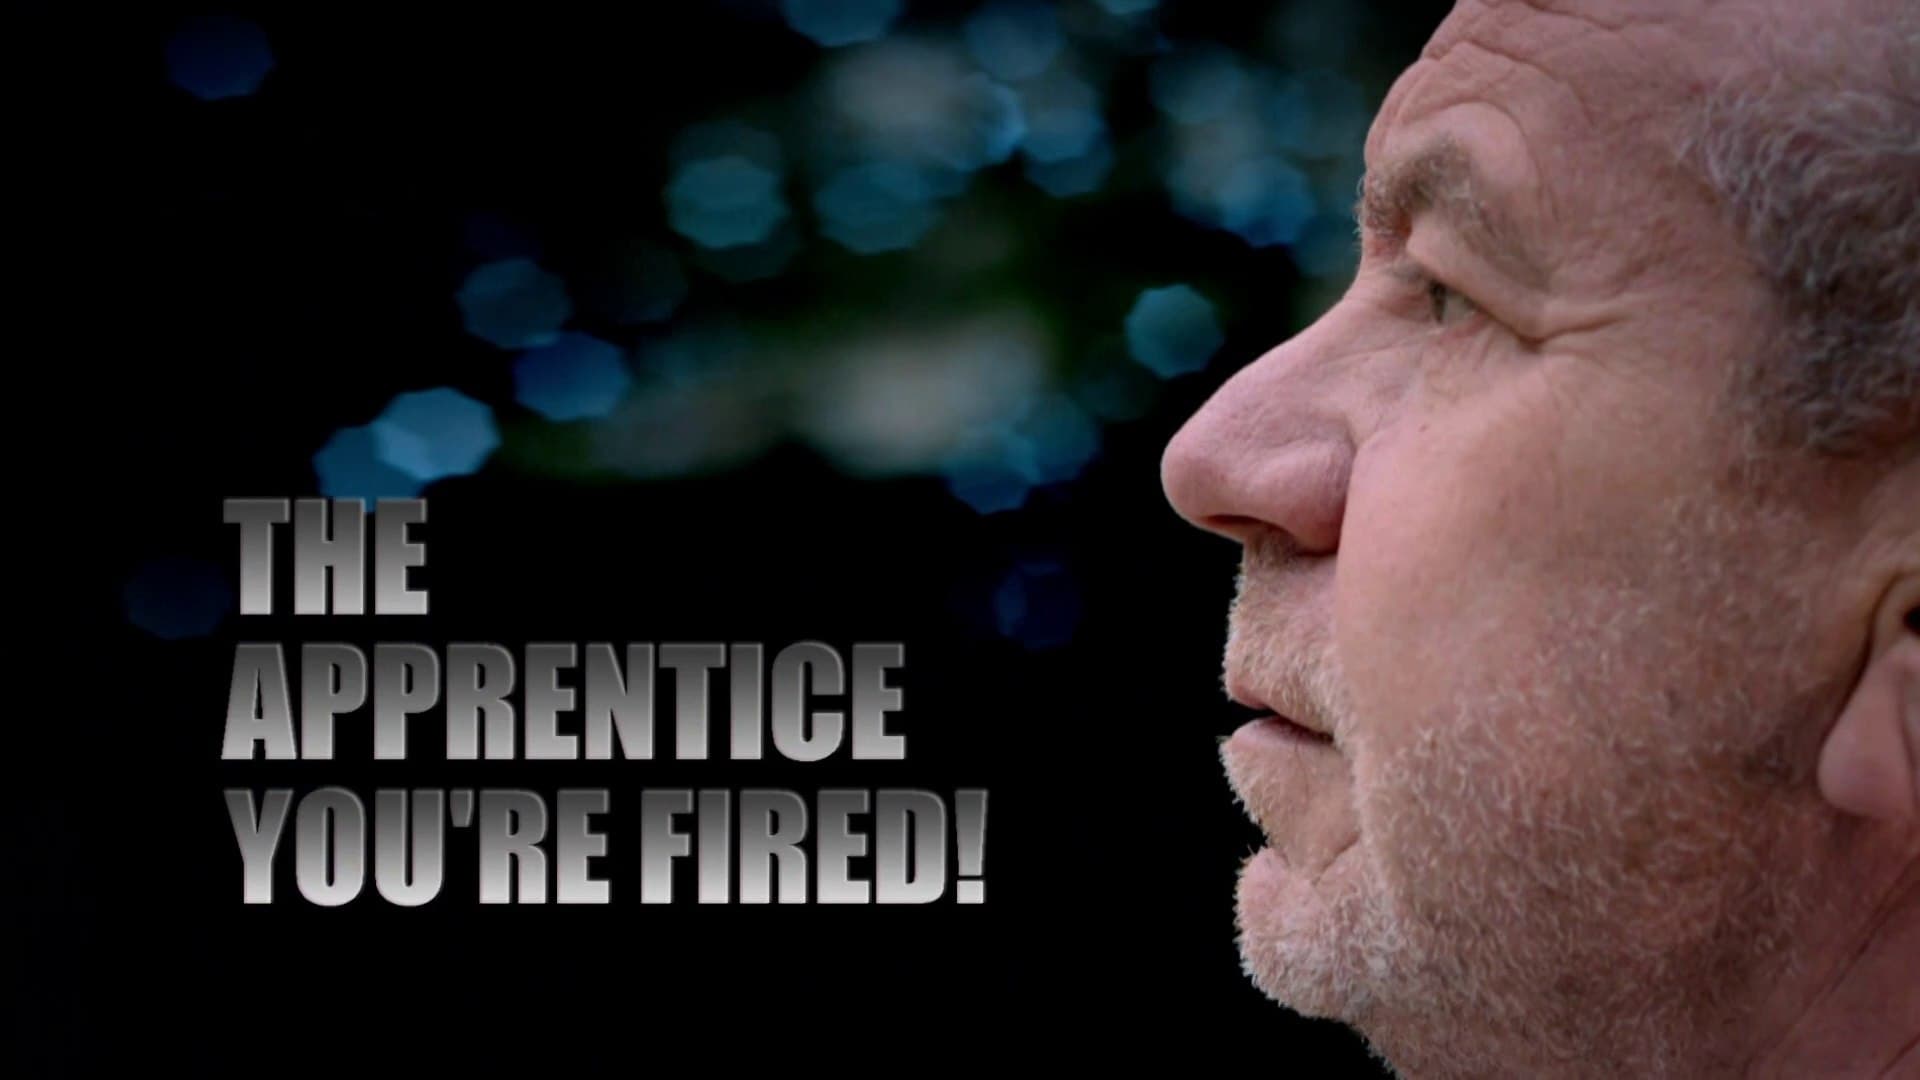 The Apprentice: You're Fired! - Season 8